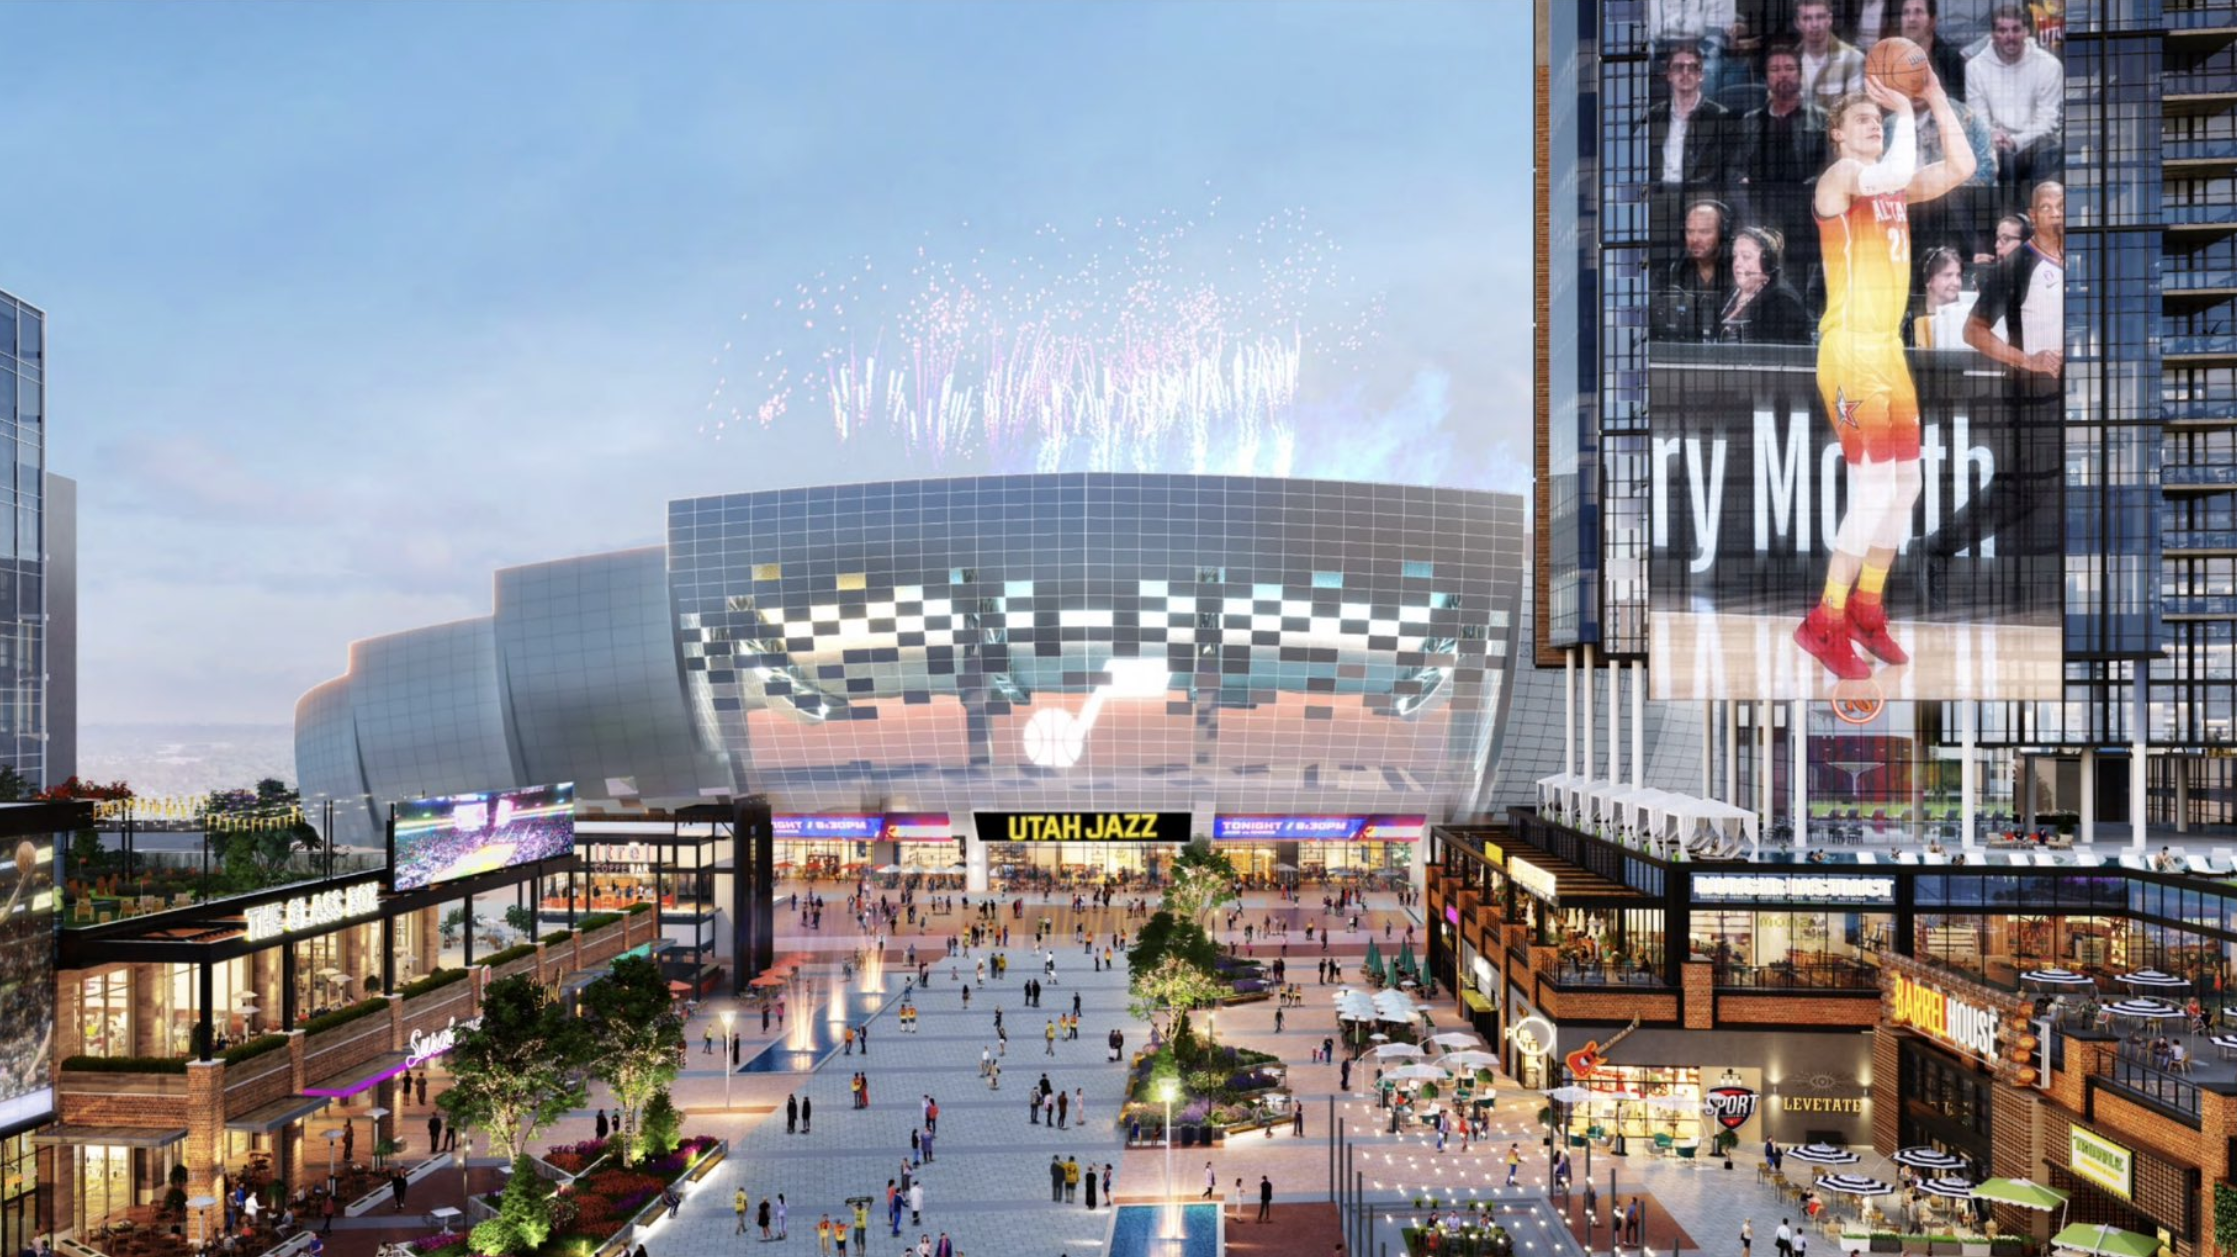 possible new jazz arena shown in rendering of downtown salt lake...